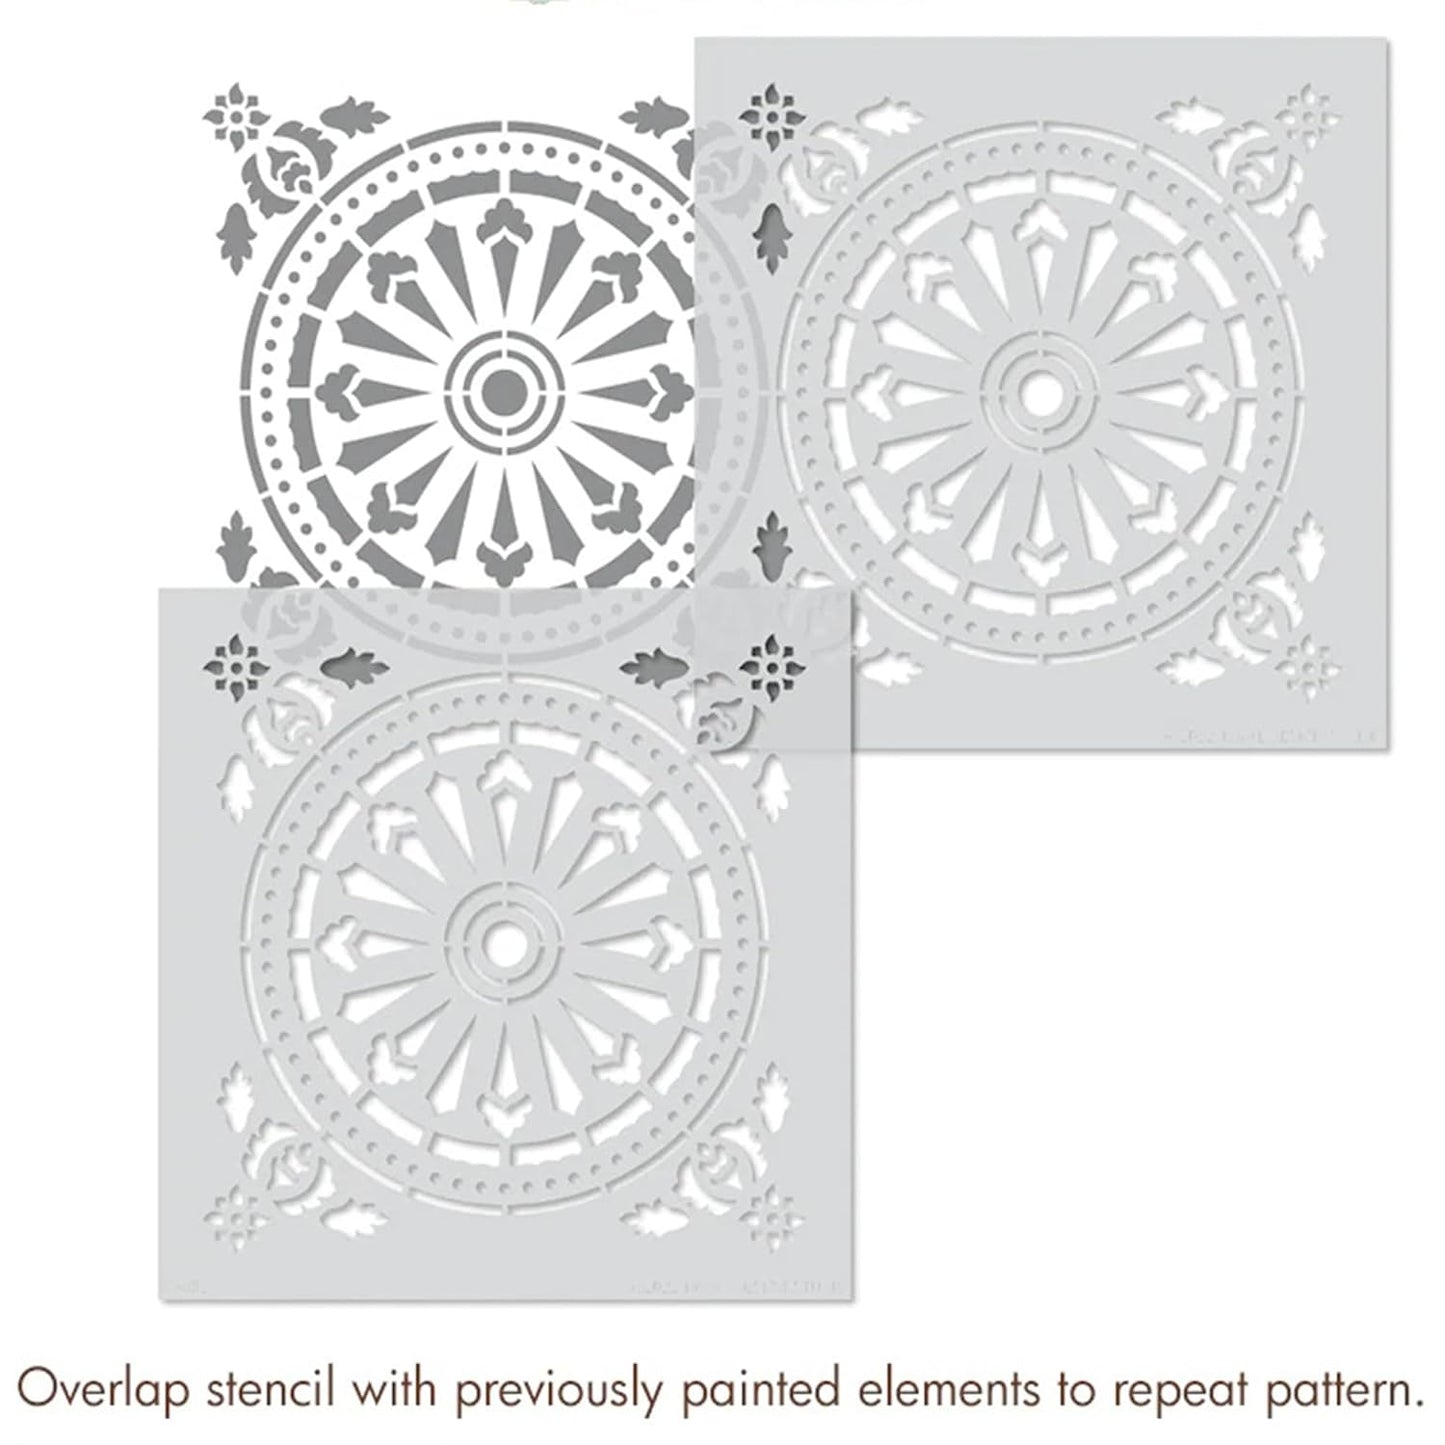 Latest Circle Allover Stencils for Wall Painting - Pack of 2, Sheet Size 12 x 12 inch/Design for Wall Painting 10 x 10 inch - Small